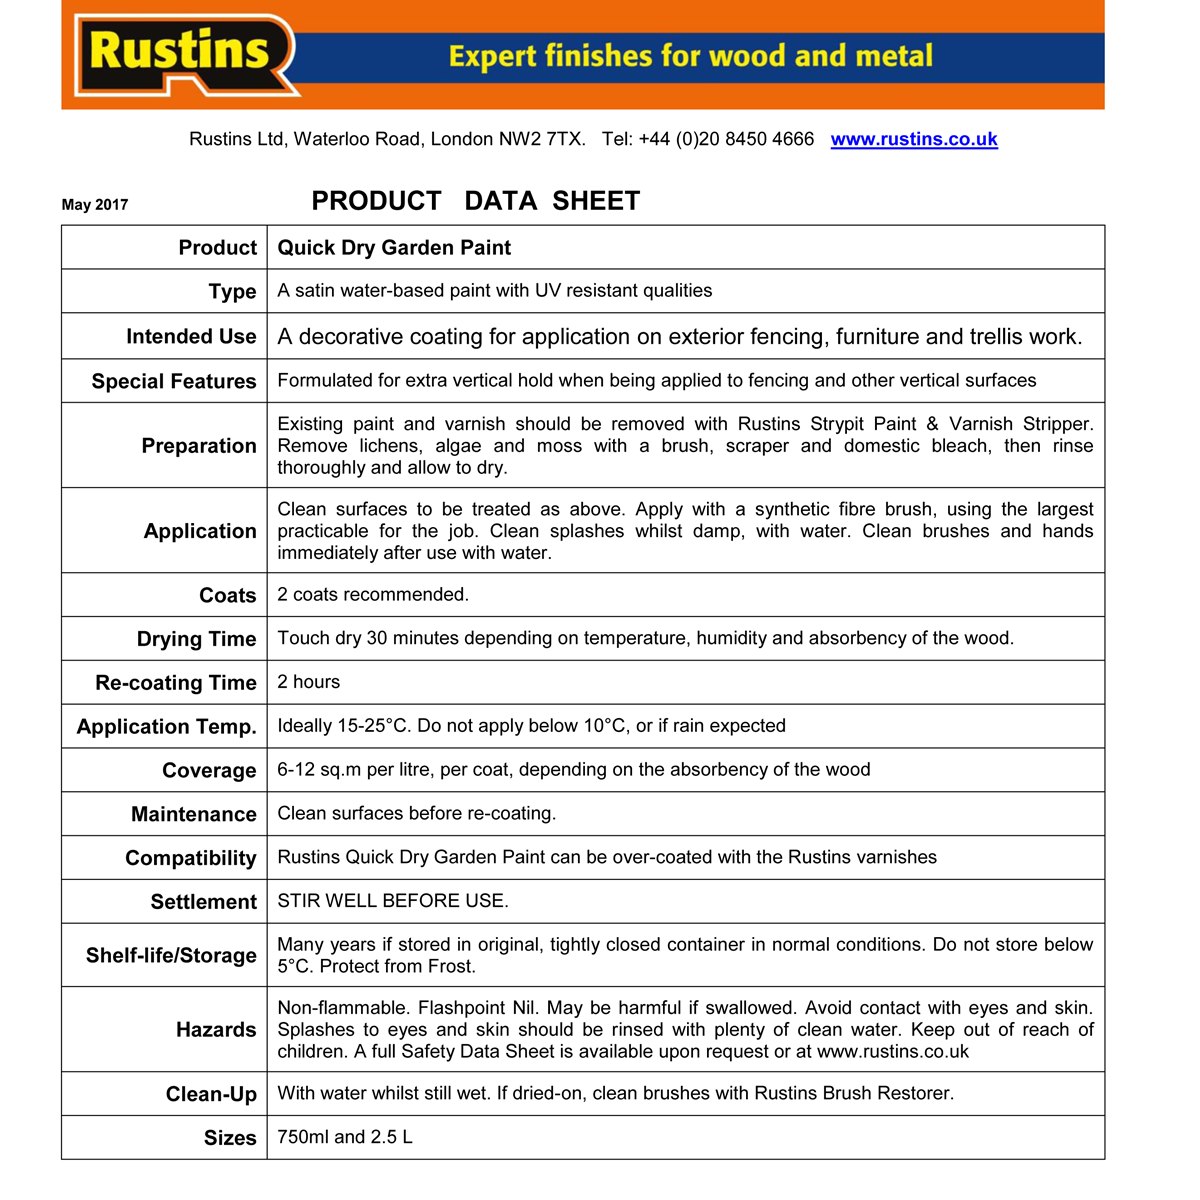 Rustins Quick Dry Garden Paint Usage Instructions